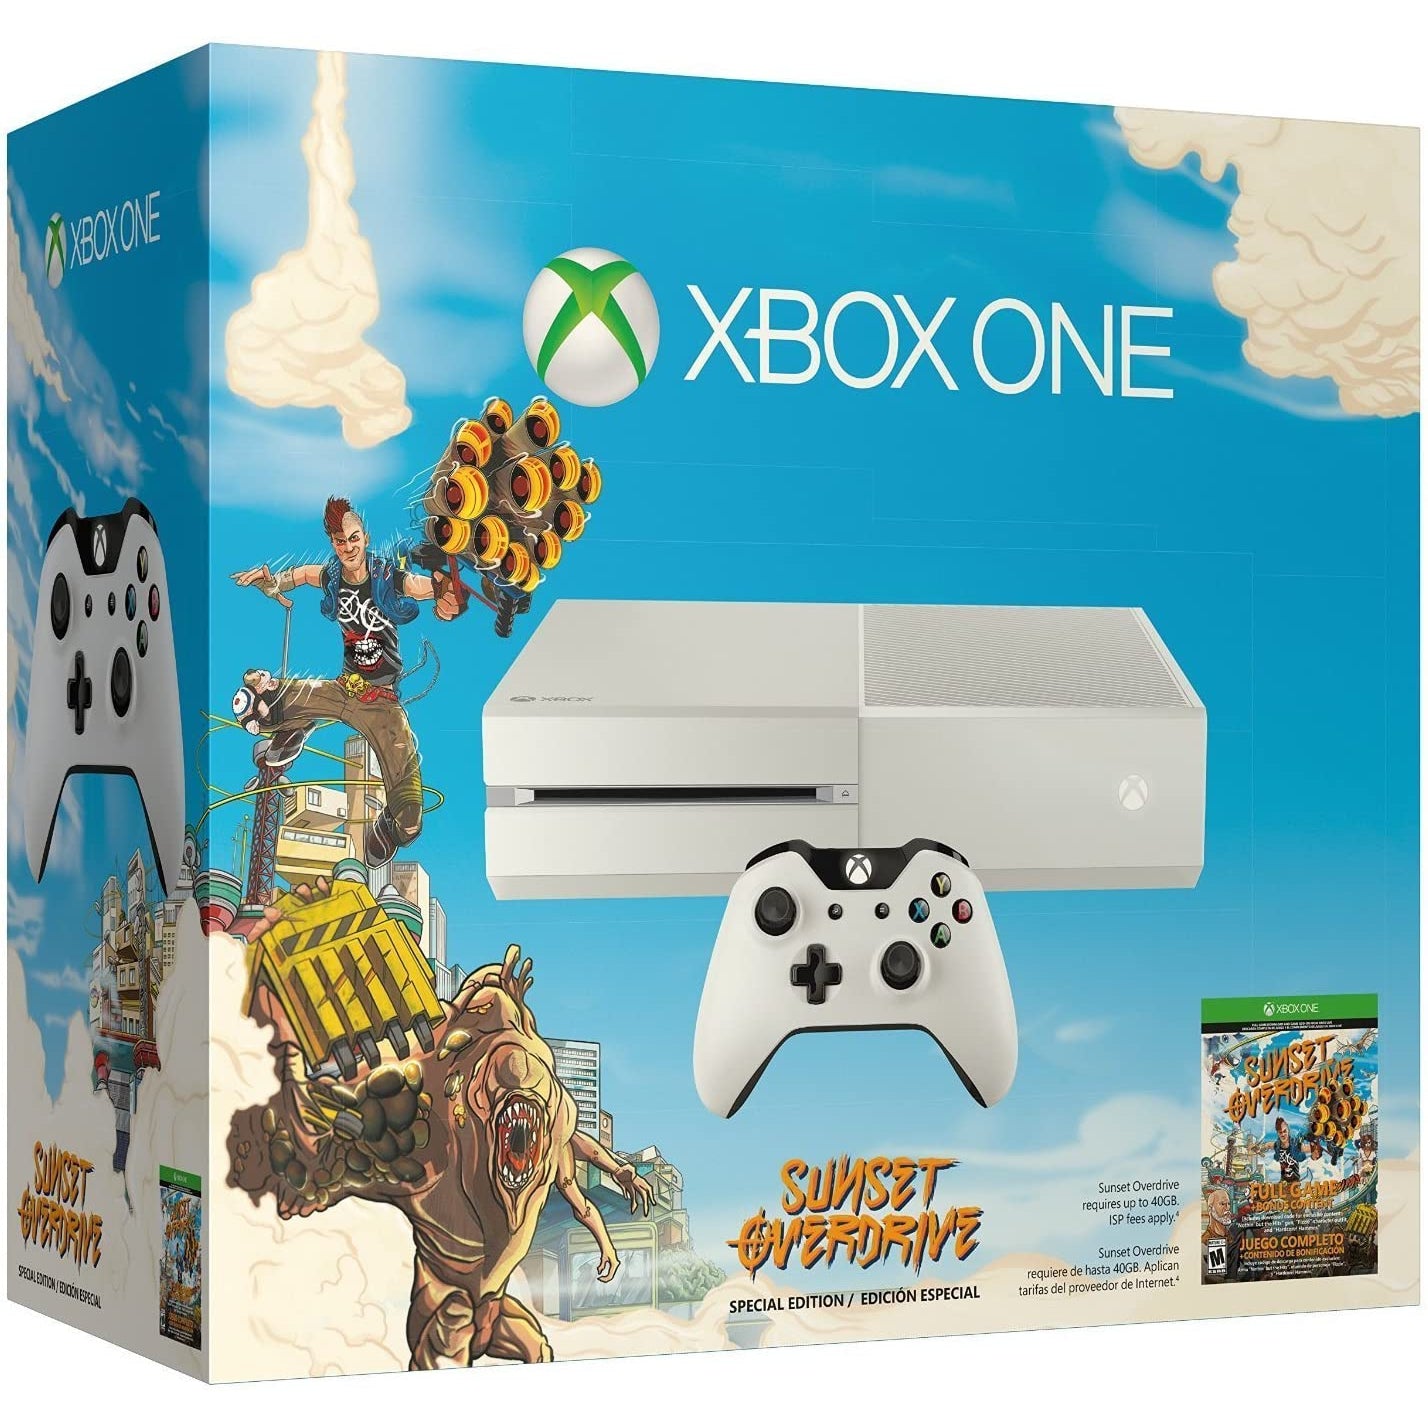 Xbox One White Console with Sunset Overdrive (1TB)